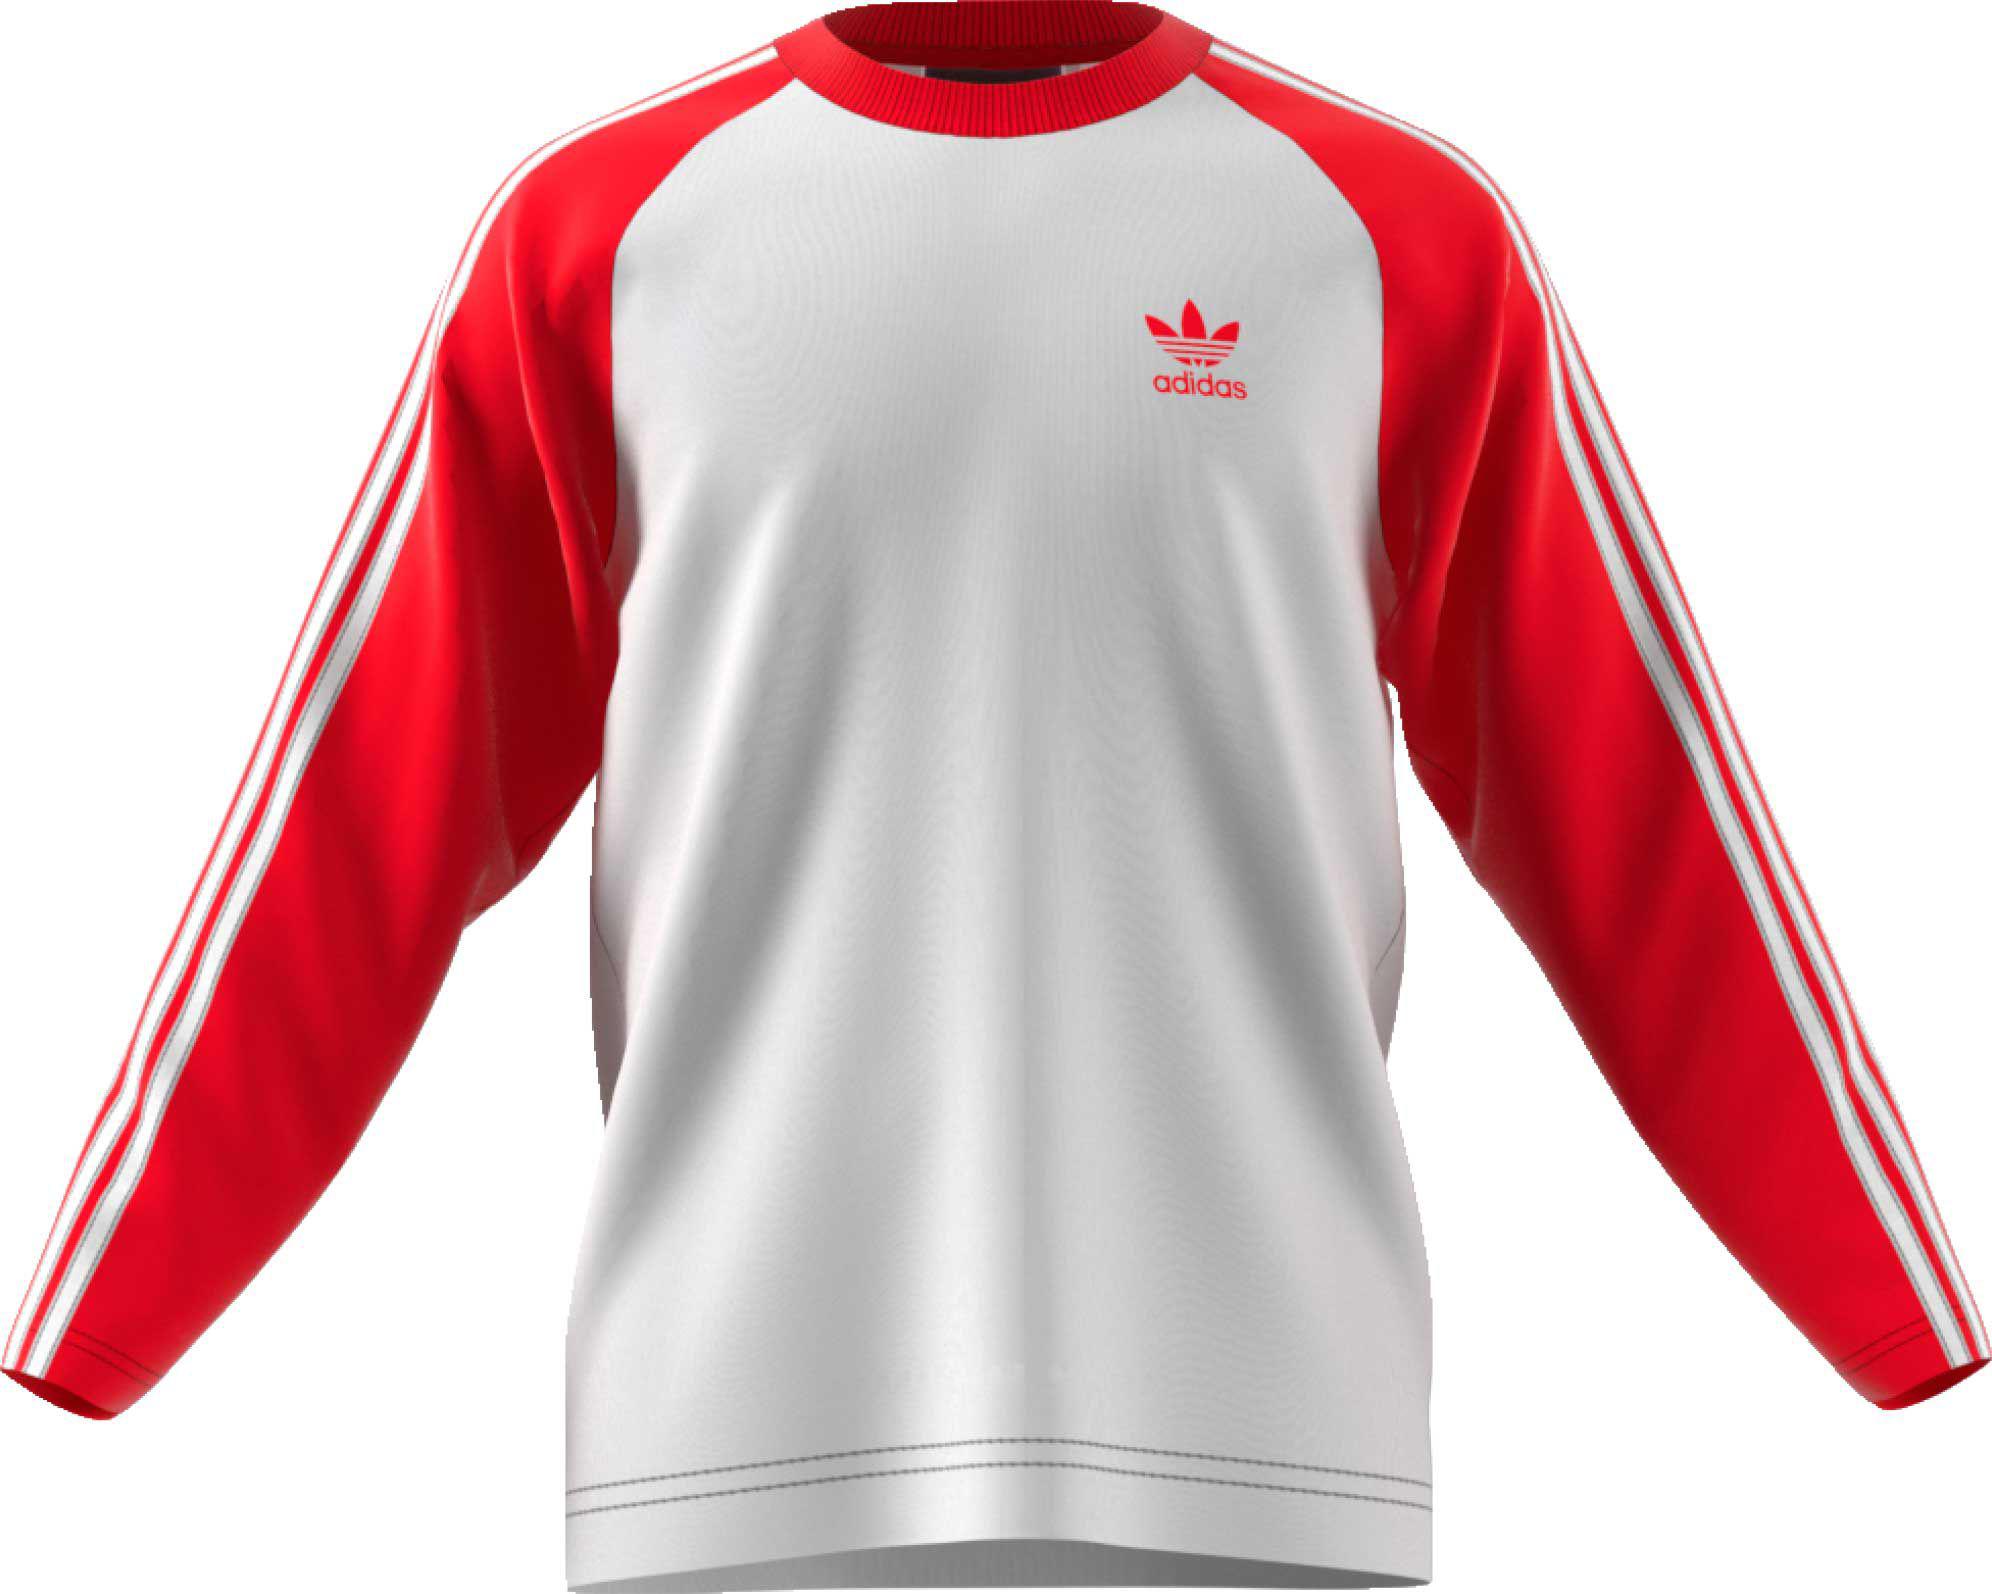 adidas t shirt white and red